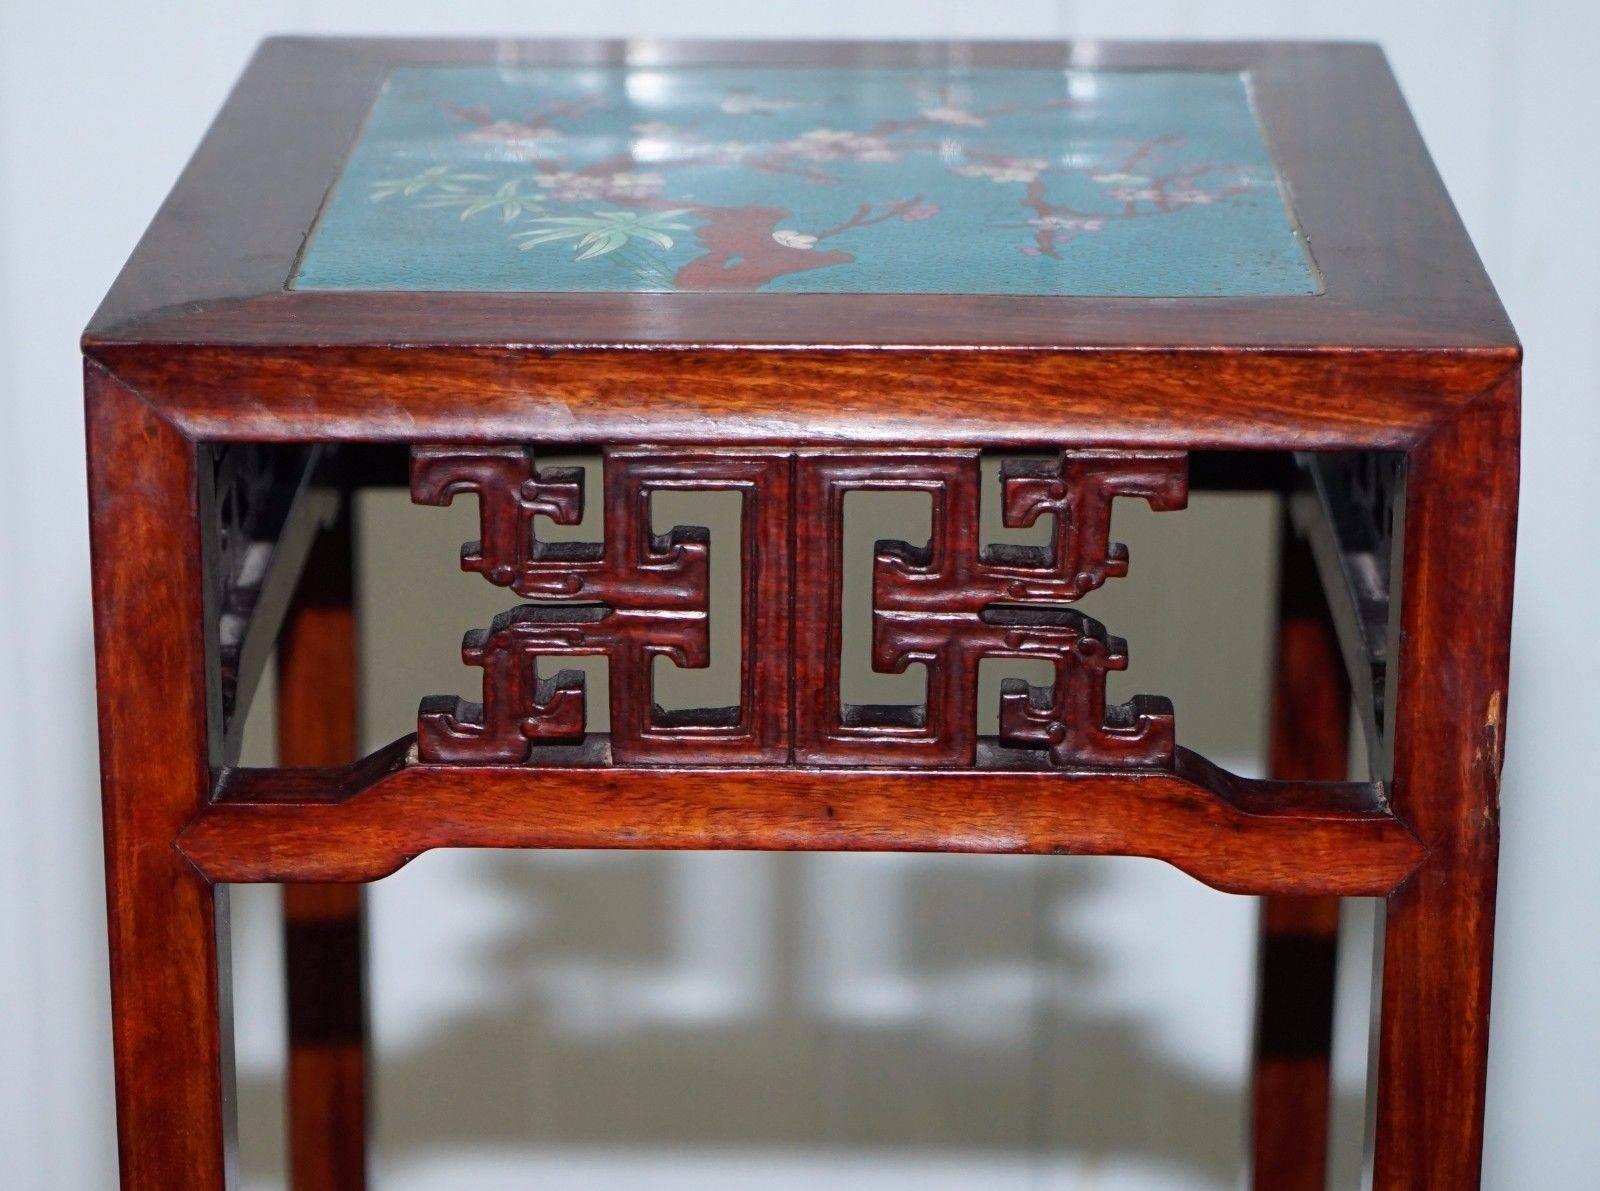 Nice pair of solid Rosewood Chinese Chen Leung Jardiniere plant pot stands with hand signed fret work tiles

Please note the delivery fee listed is just a guide, for an accurate quote please send me your postcode and I’ll price it up for you
 
A